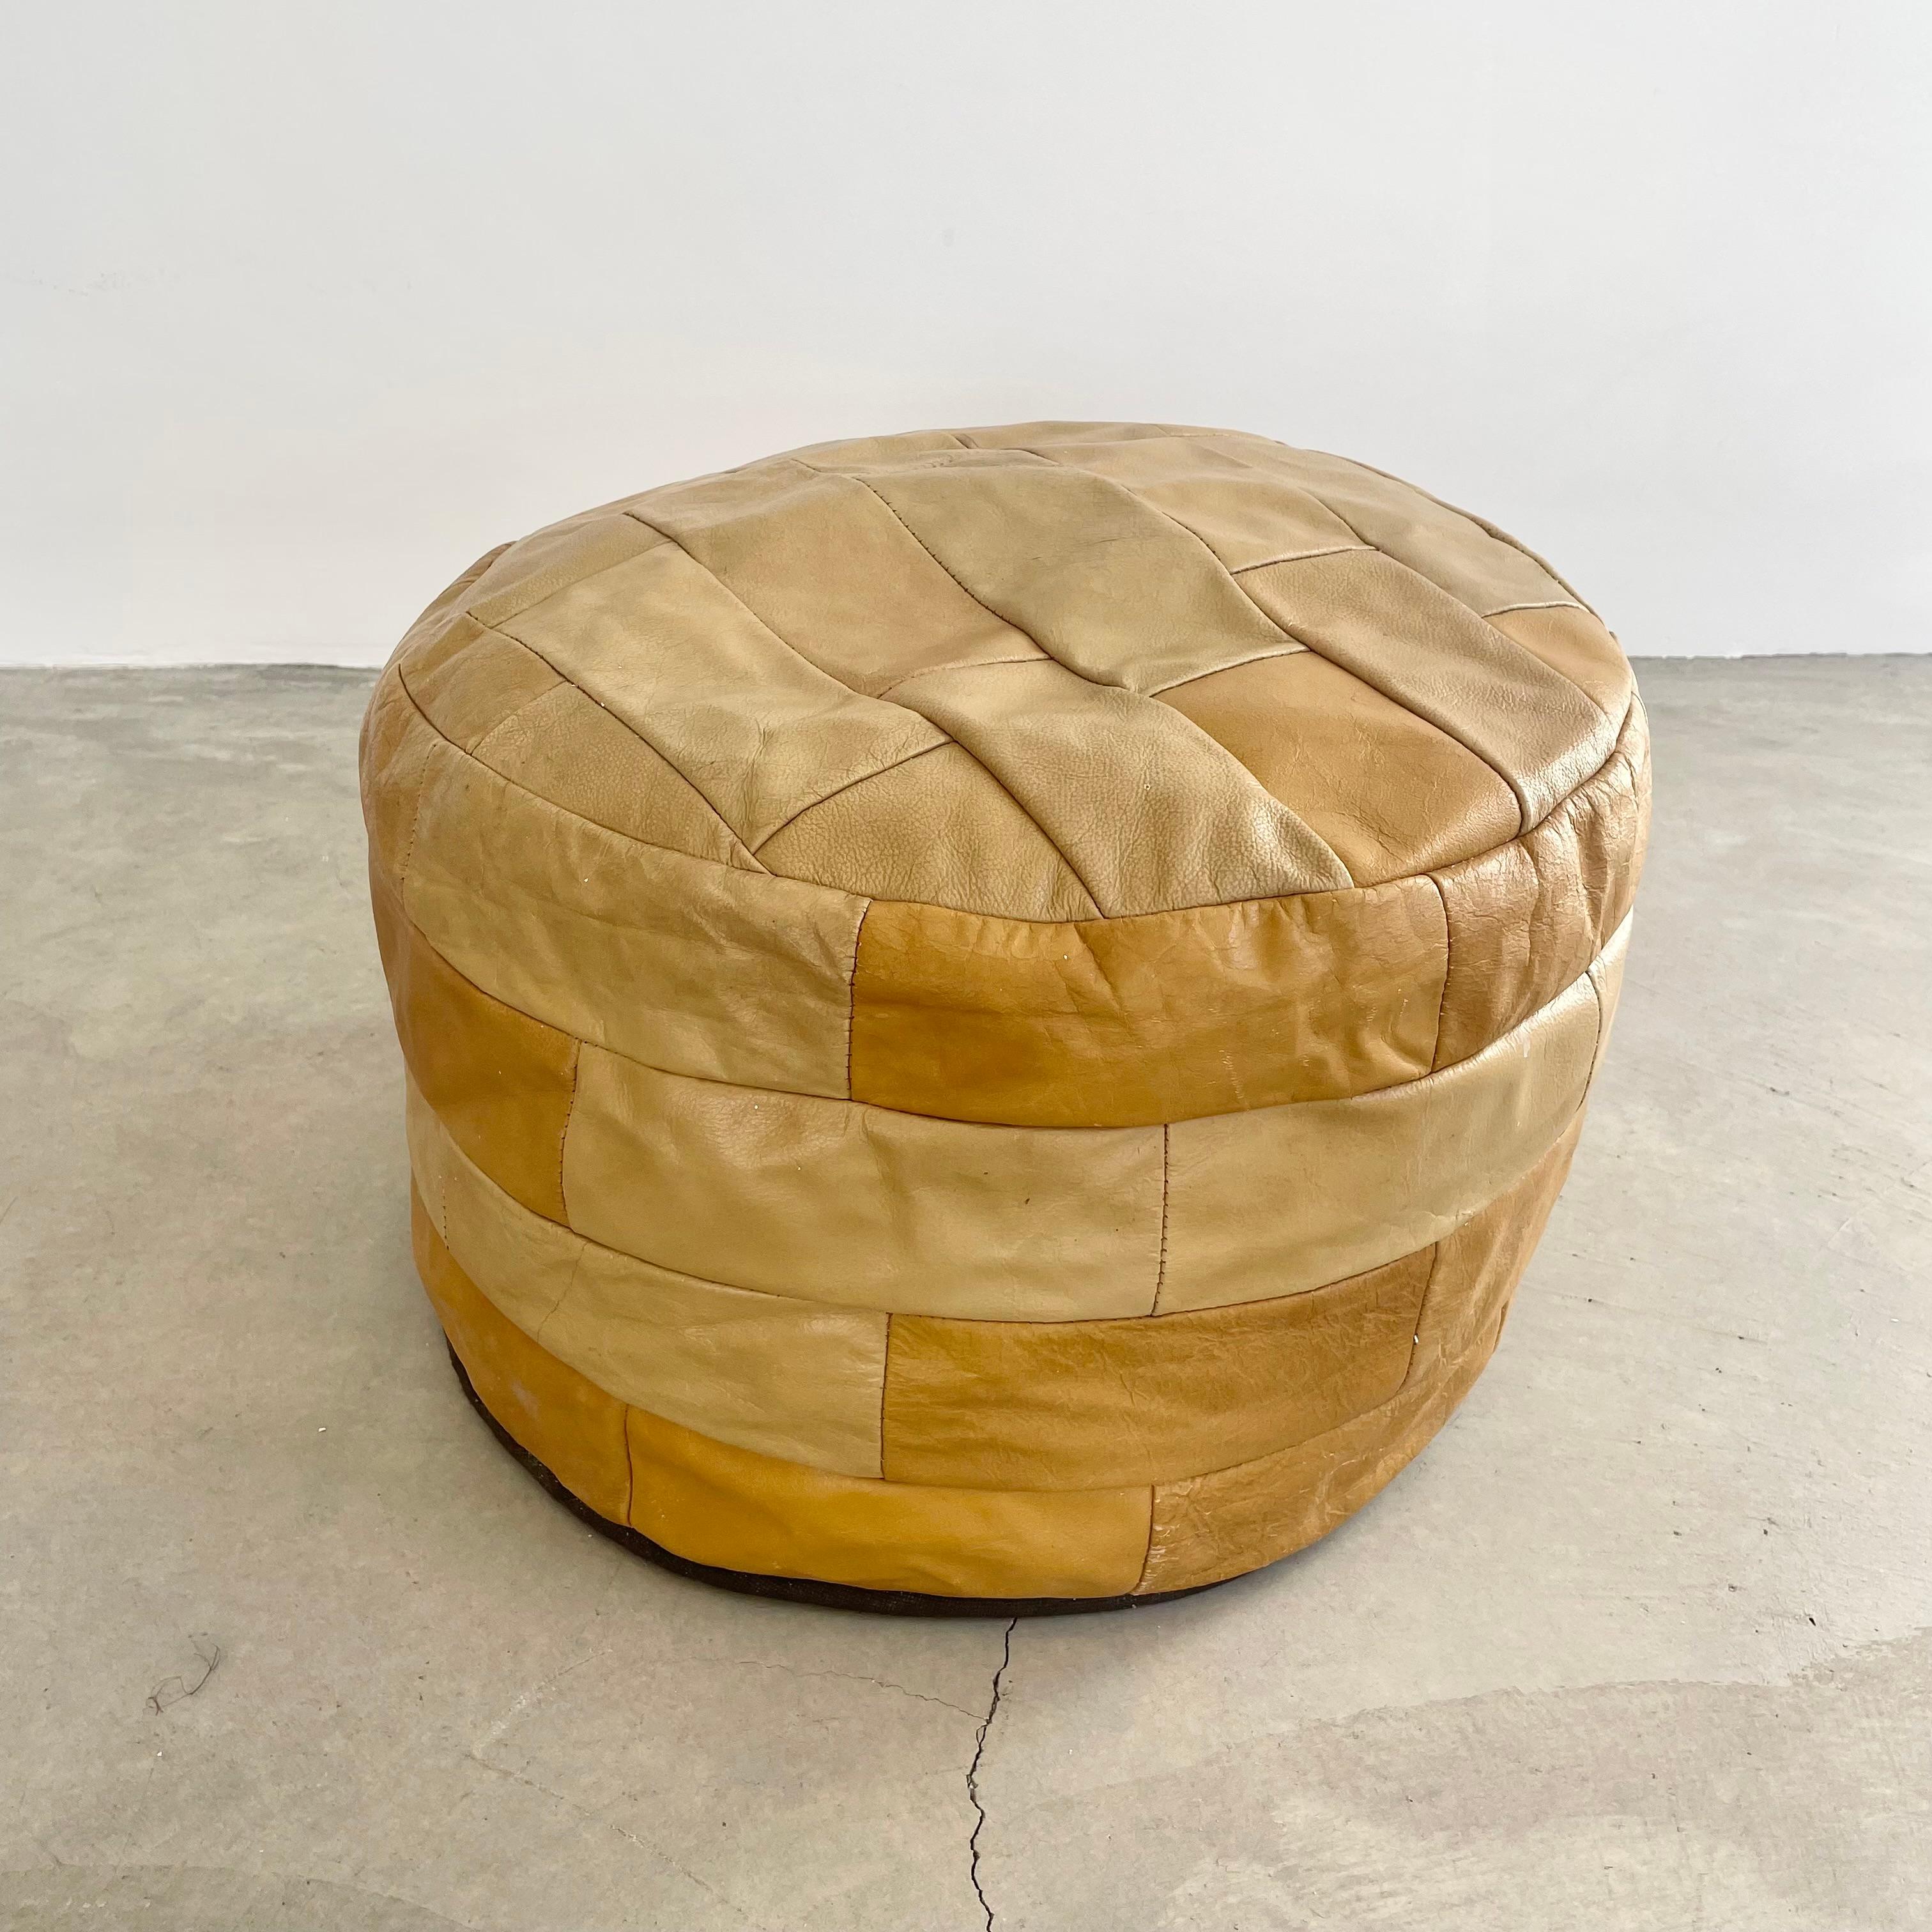 Chic and classy tan leather pouf/ottoman by Swiss designer De Sede with square patchwork. Handmade with wonderful faded patina or varying hues of fallow, barley and tan. Gorgeous accent piece. Good vintage condition. Wear appropriate with age. Brand